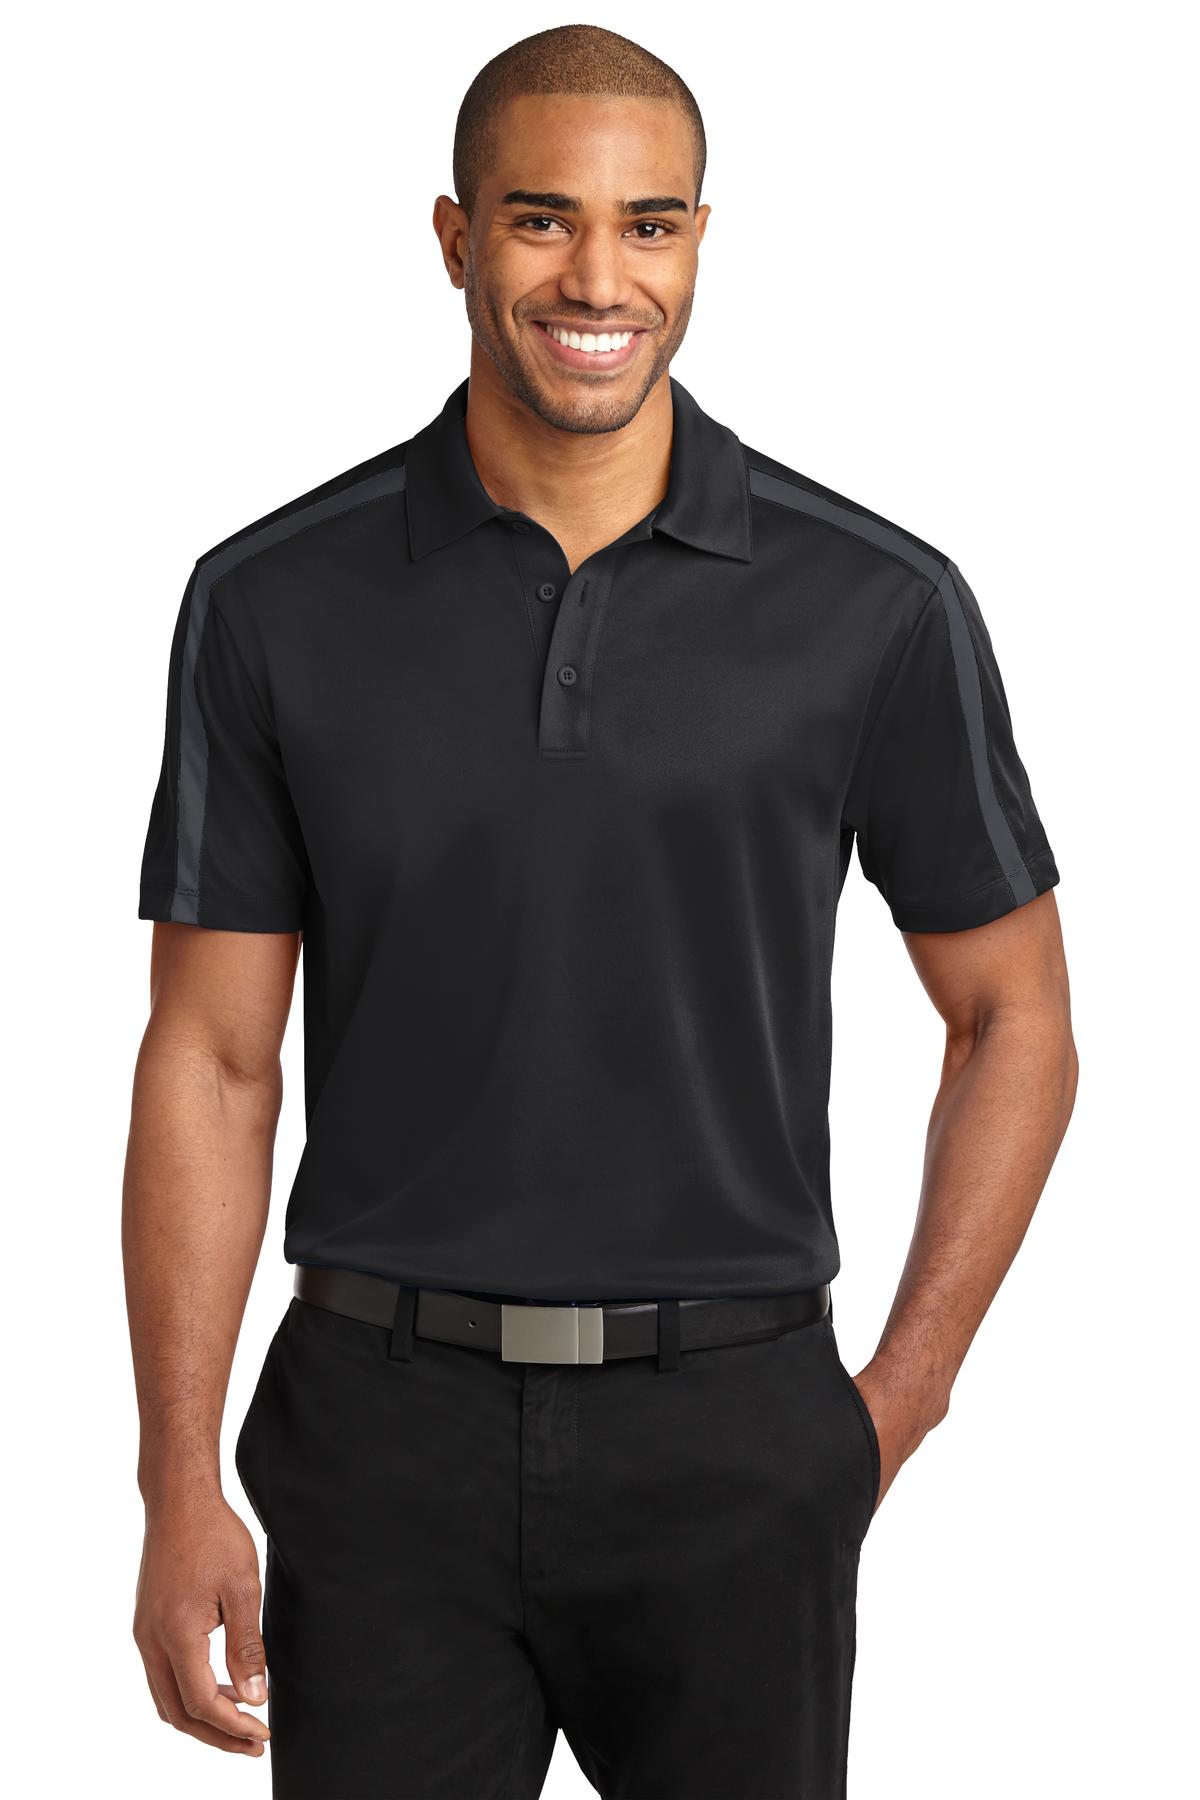 Port Authority Hospitality Polos & Knits ® Silk Touch Performance Colorblock Stripe Polo.-Port Authority